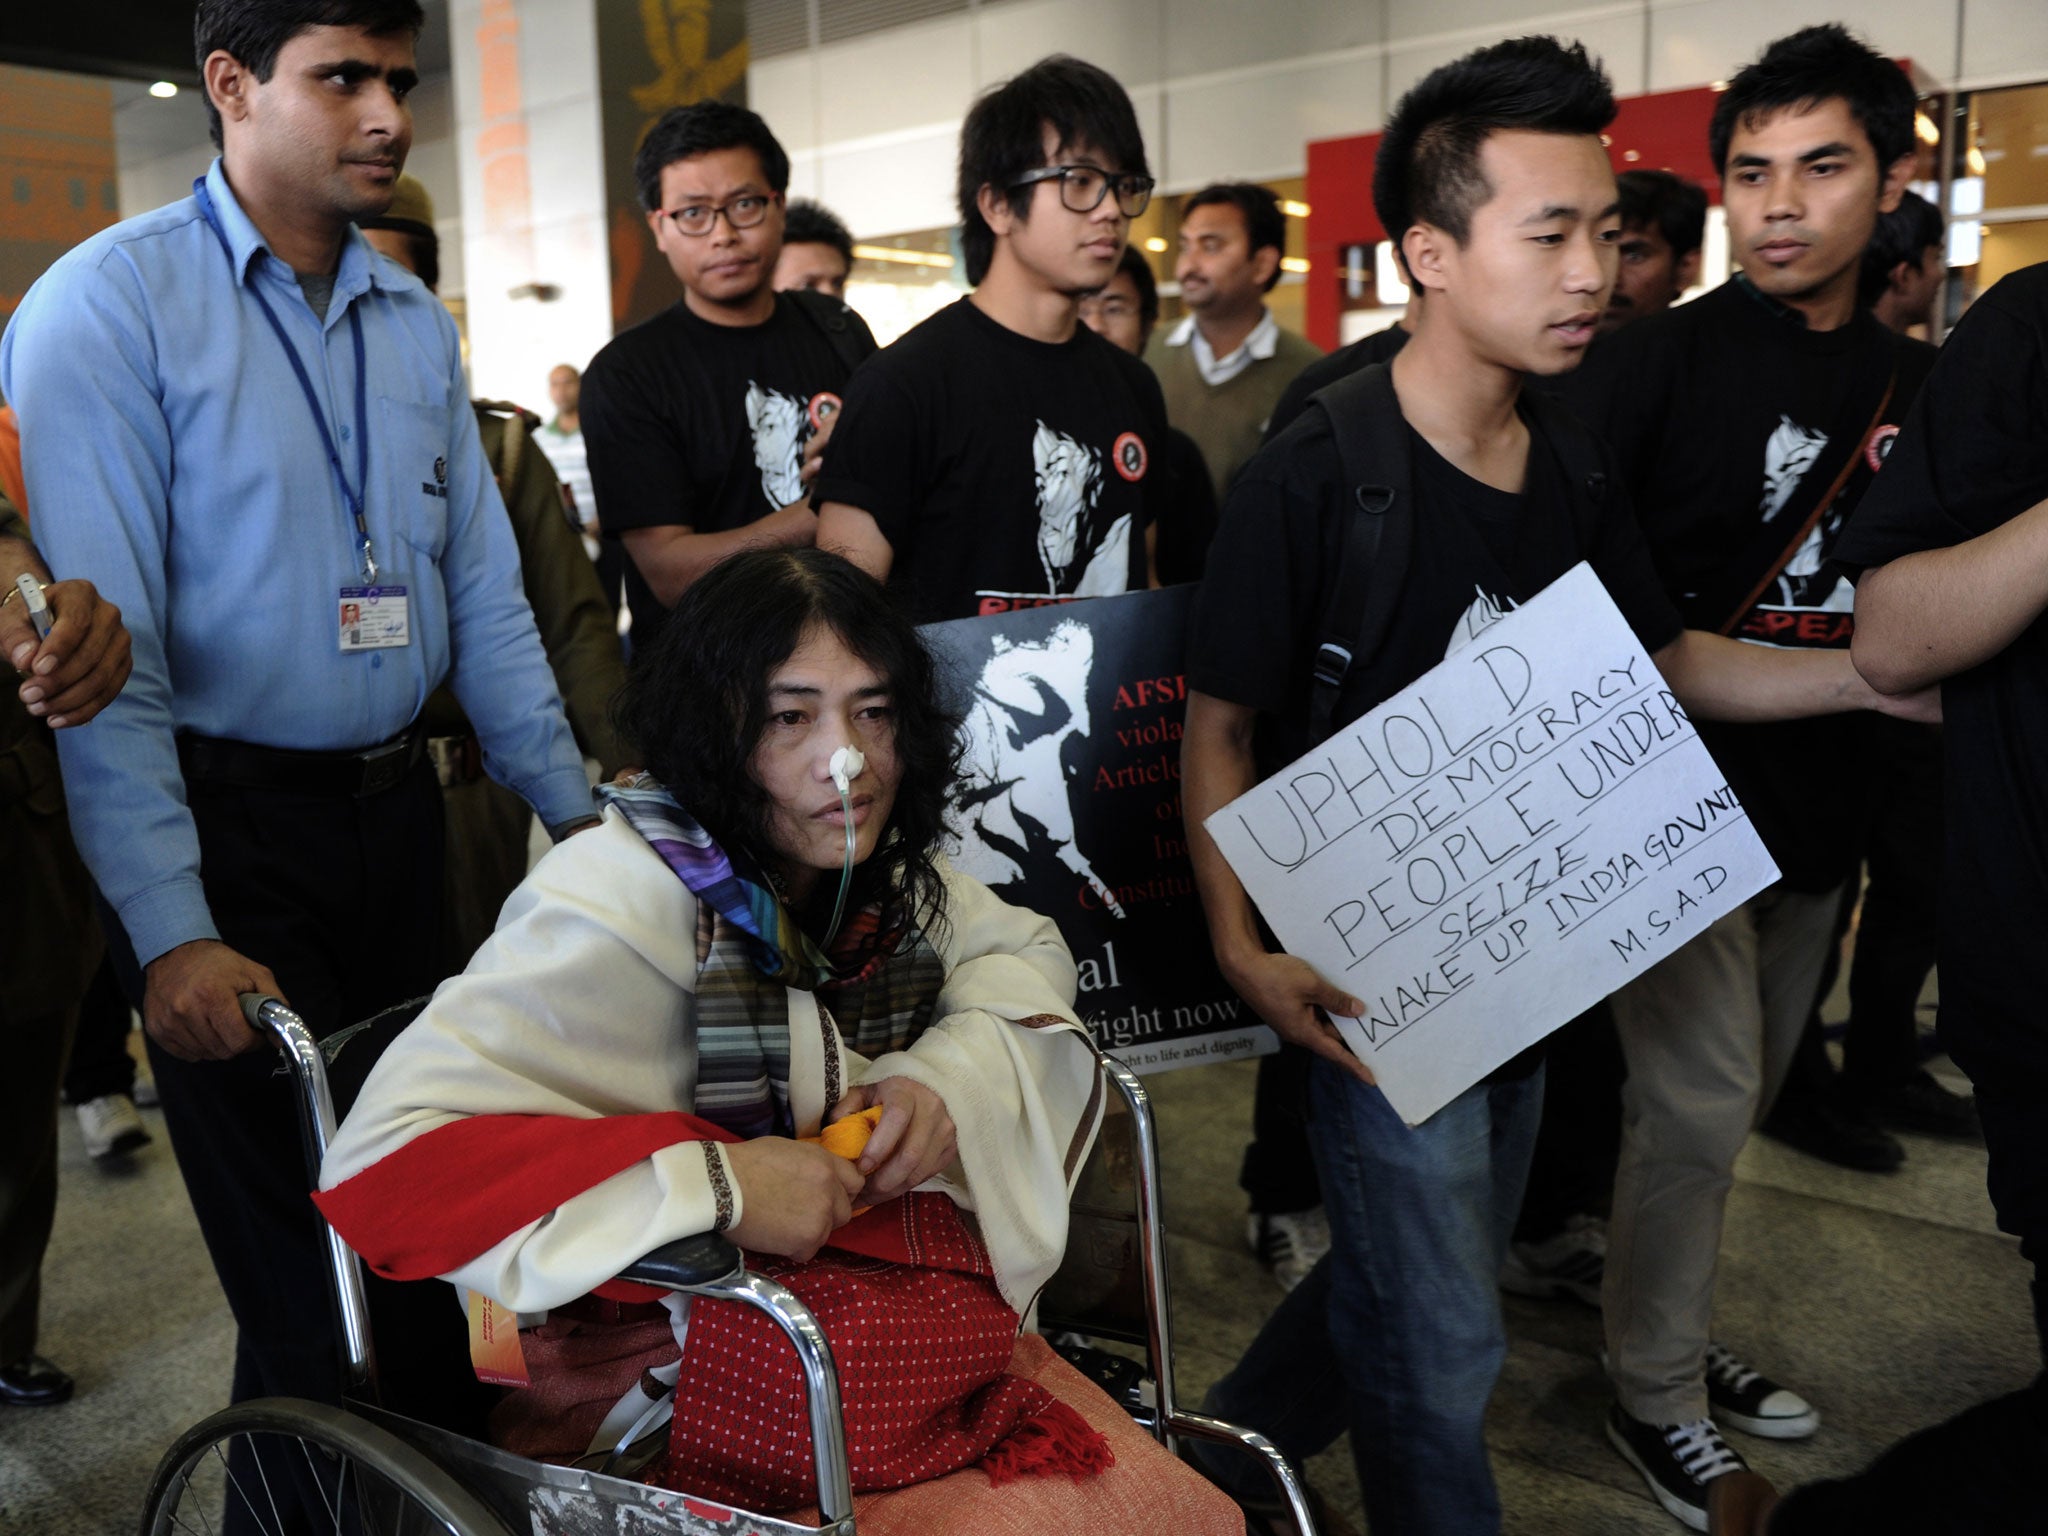 Irom Sharmila, in wheelchair, has been on the world’s longest hunger strike in protest against the Armed Forces Special Powers Act